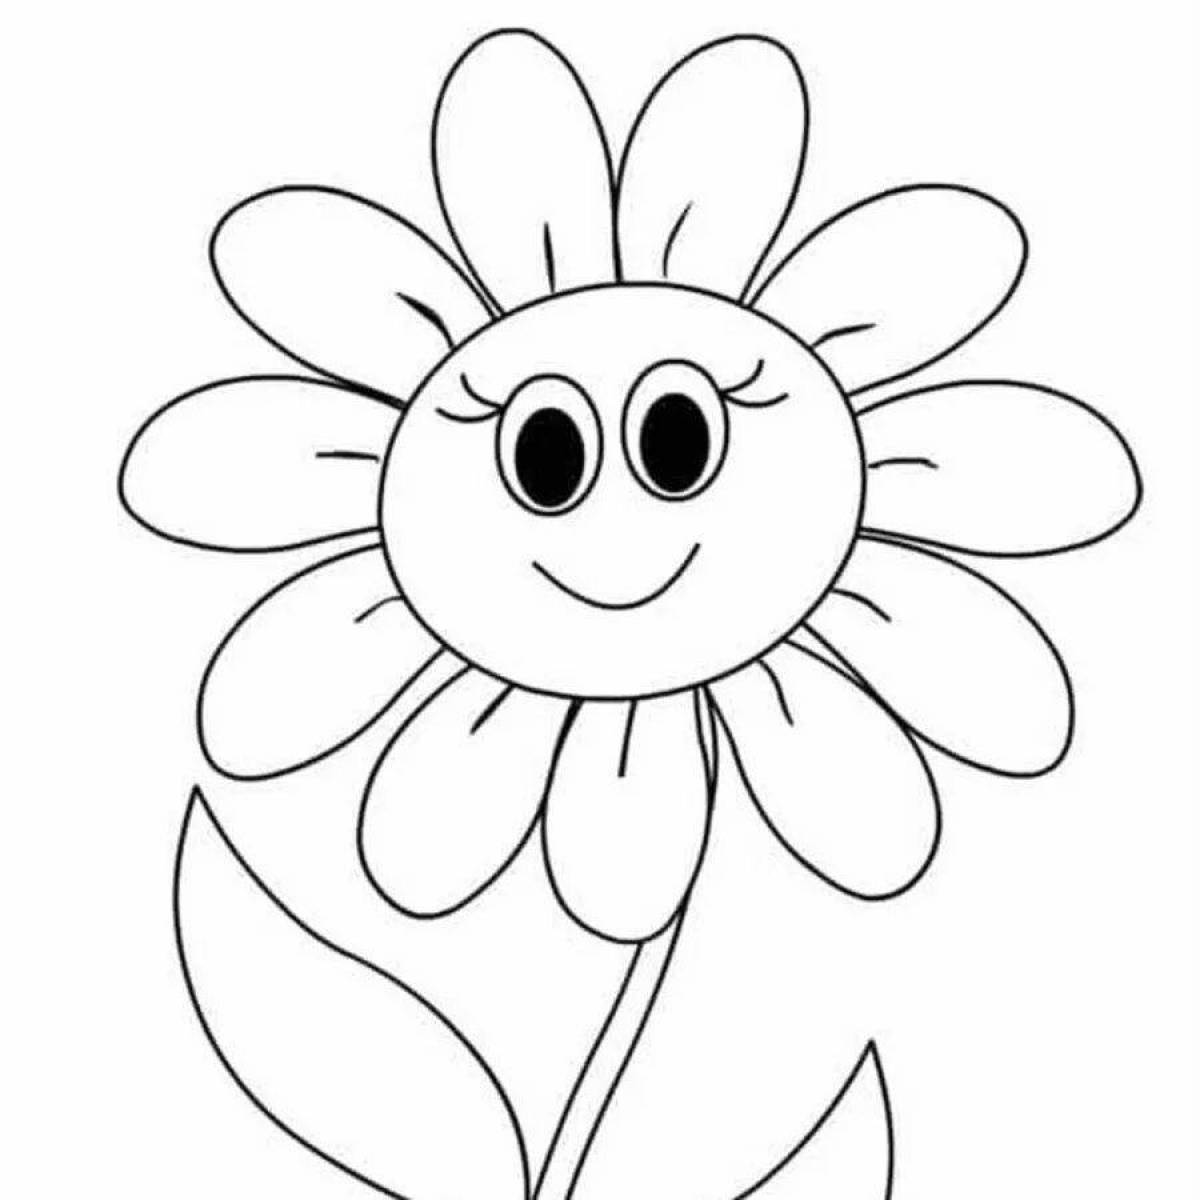 Adorable flower coloring book for 5-6 year olds